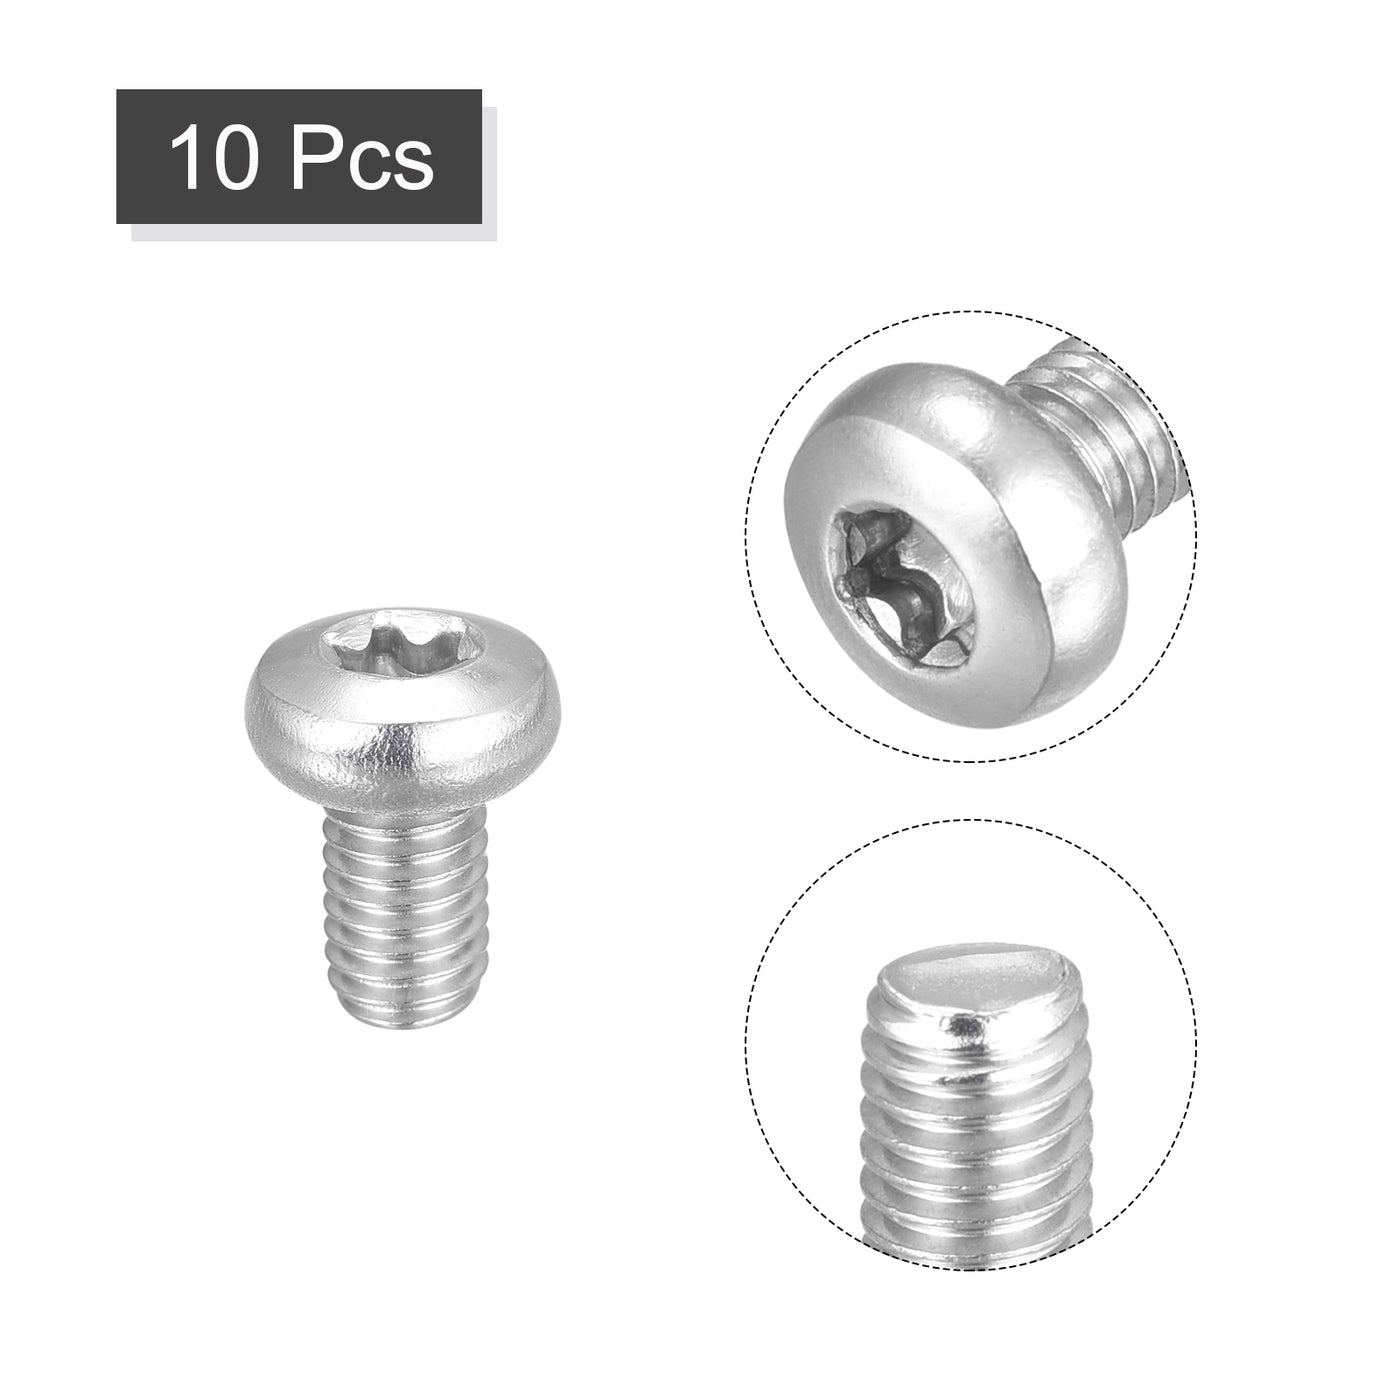 uxcell Uxcell M5x8mm Torx Security Machine Screws, 10pcs 316 Stainless Steel Pan Head Screw